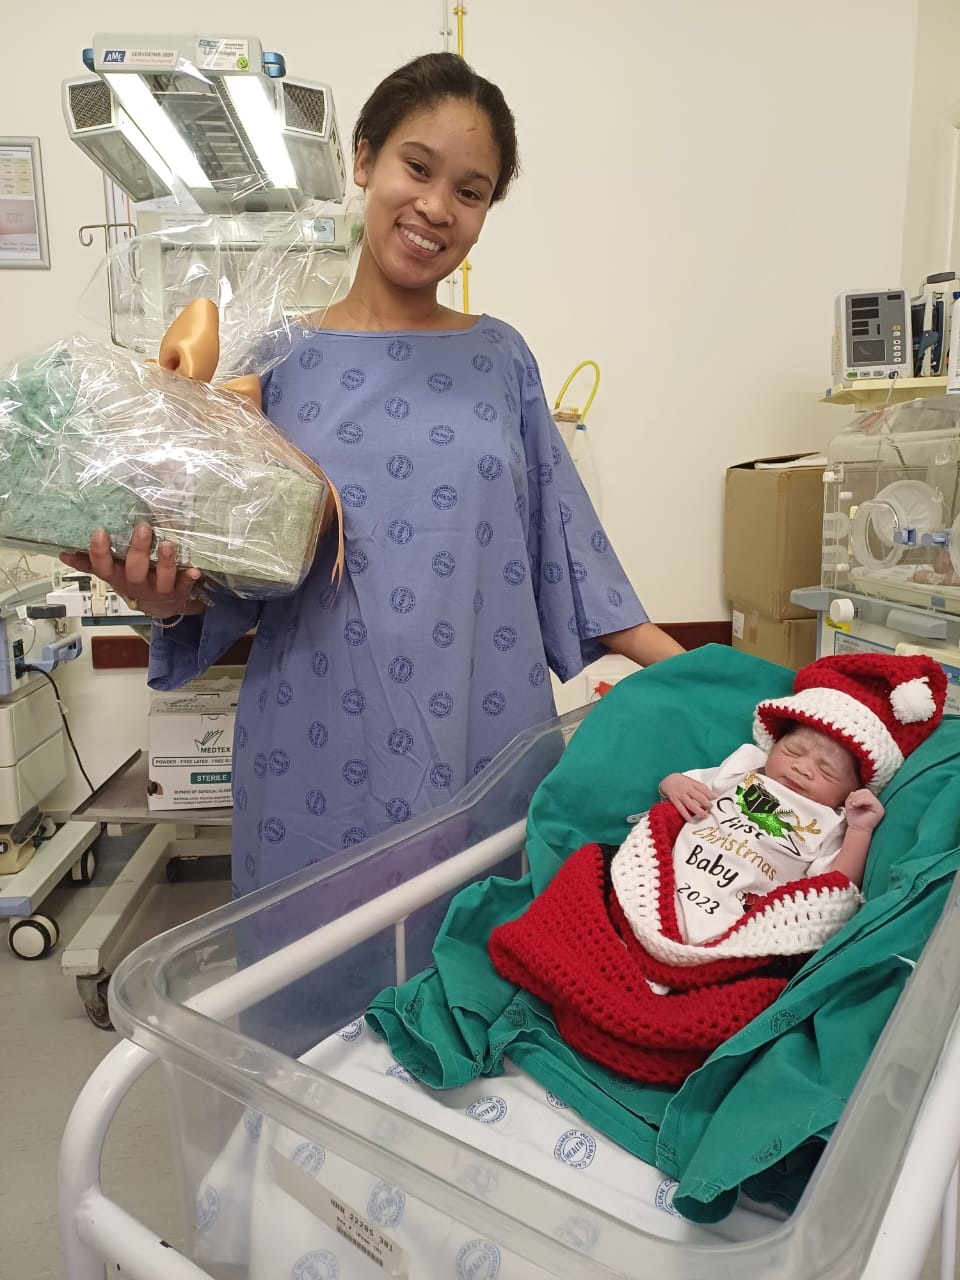 Denzi-Lee James gave birth to a baby girl of 2,55kg at 00:20 in Helderberg Hospital on Christmas Day.